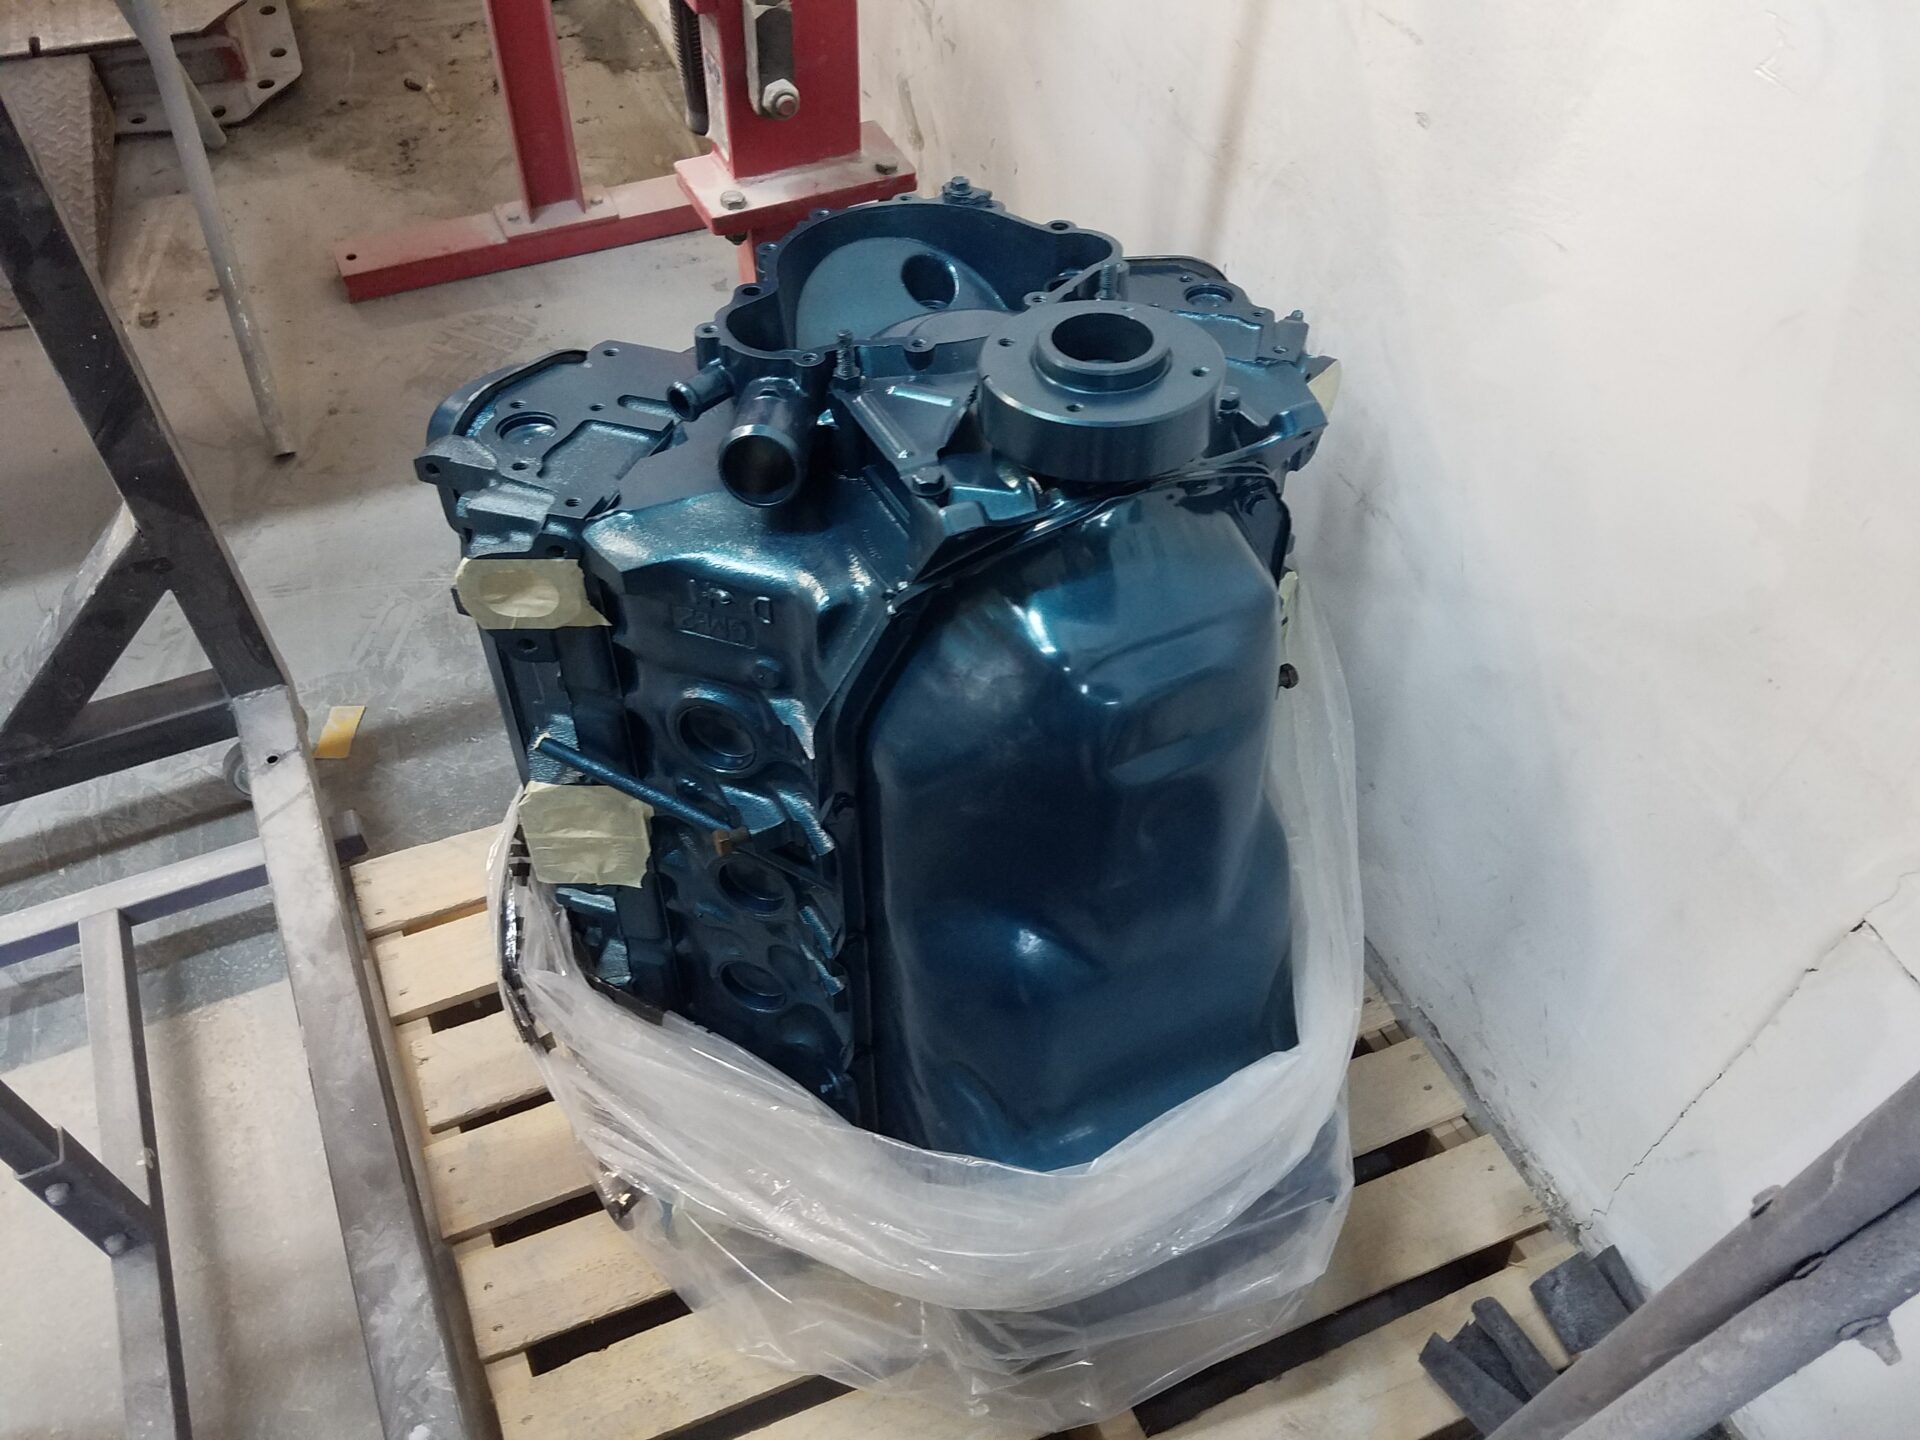 An engine part colored metallic blue